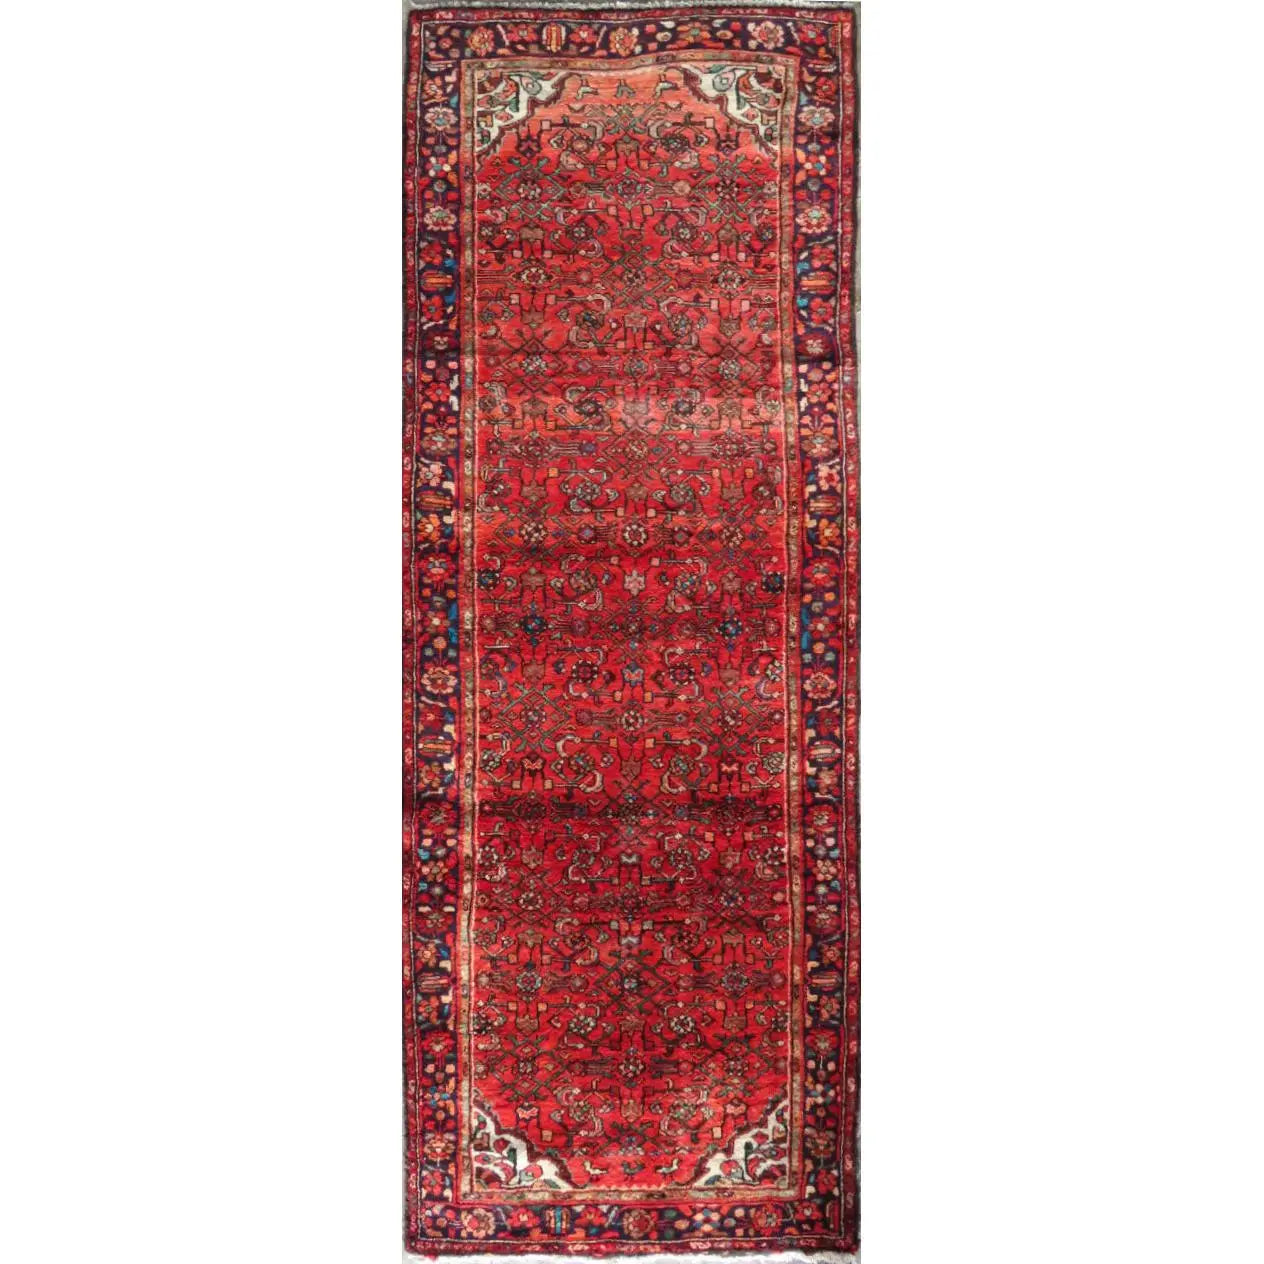 Hand-Knotted Persian Wool Rug _ Luxurious Vintage Design, 10'3" x 3'8", Artisan Crafted